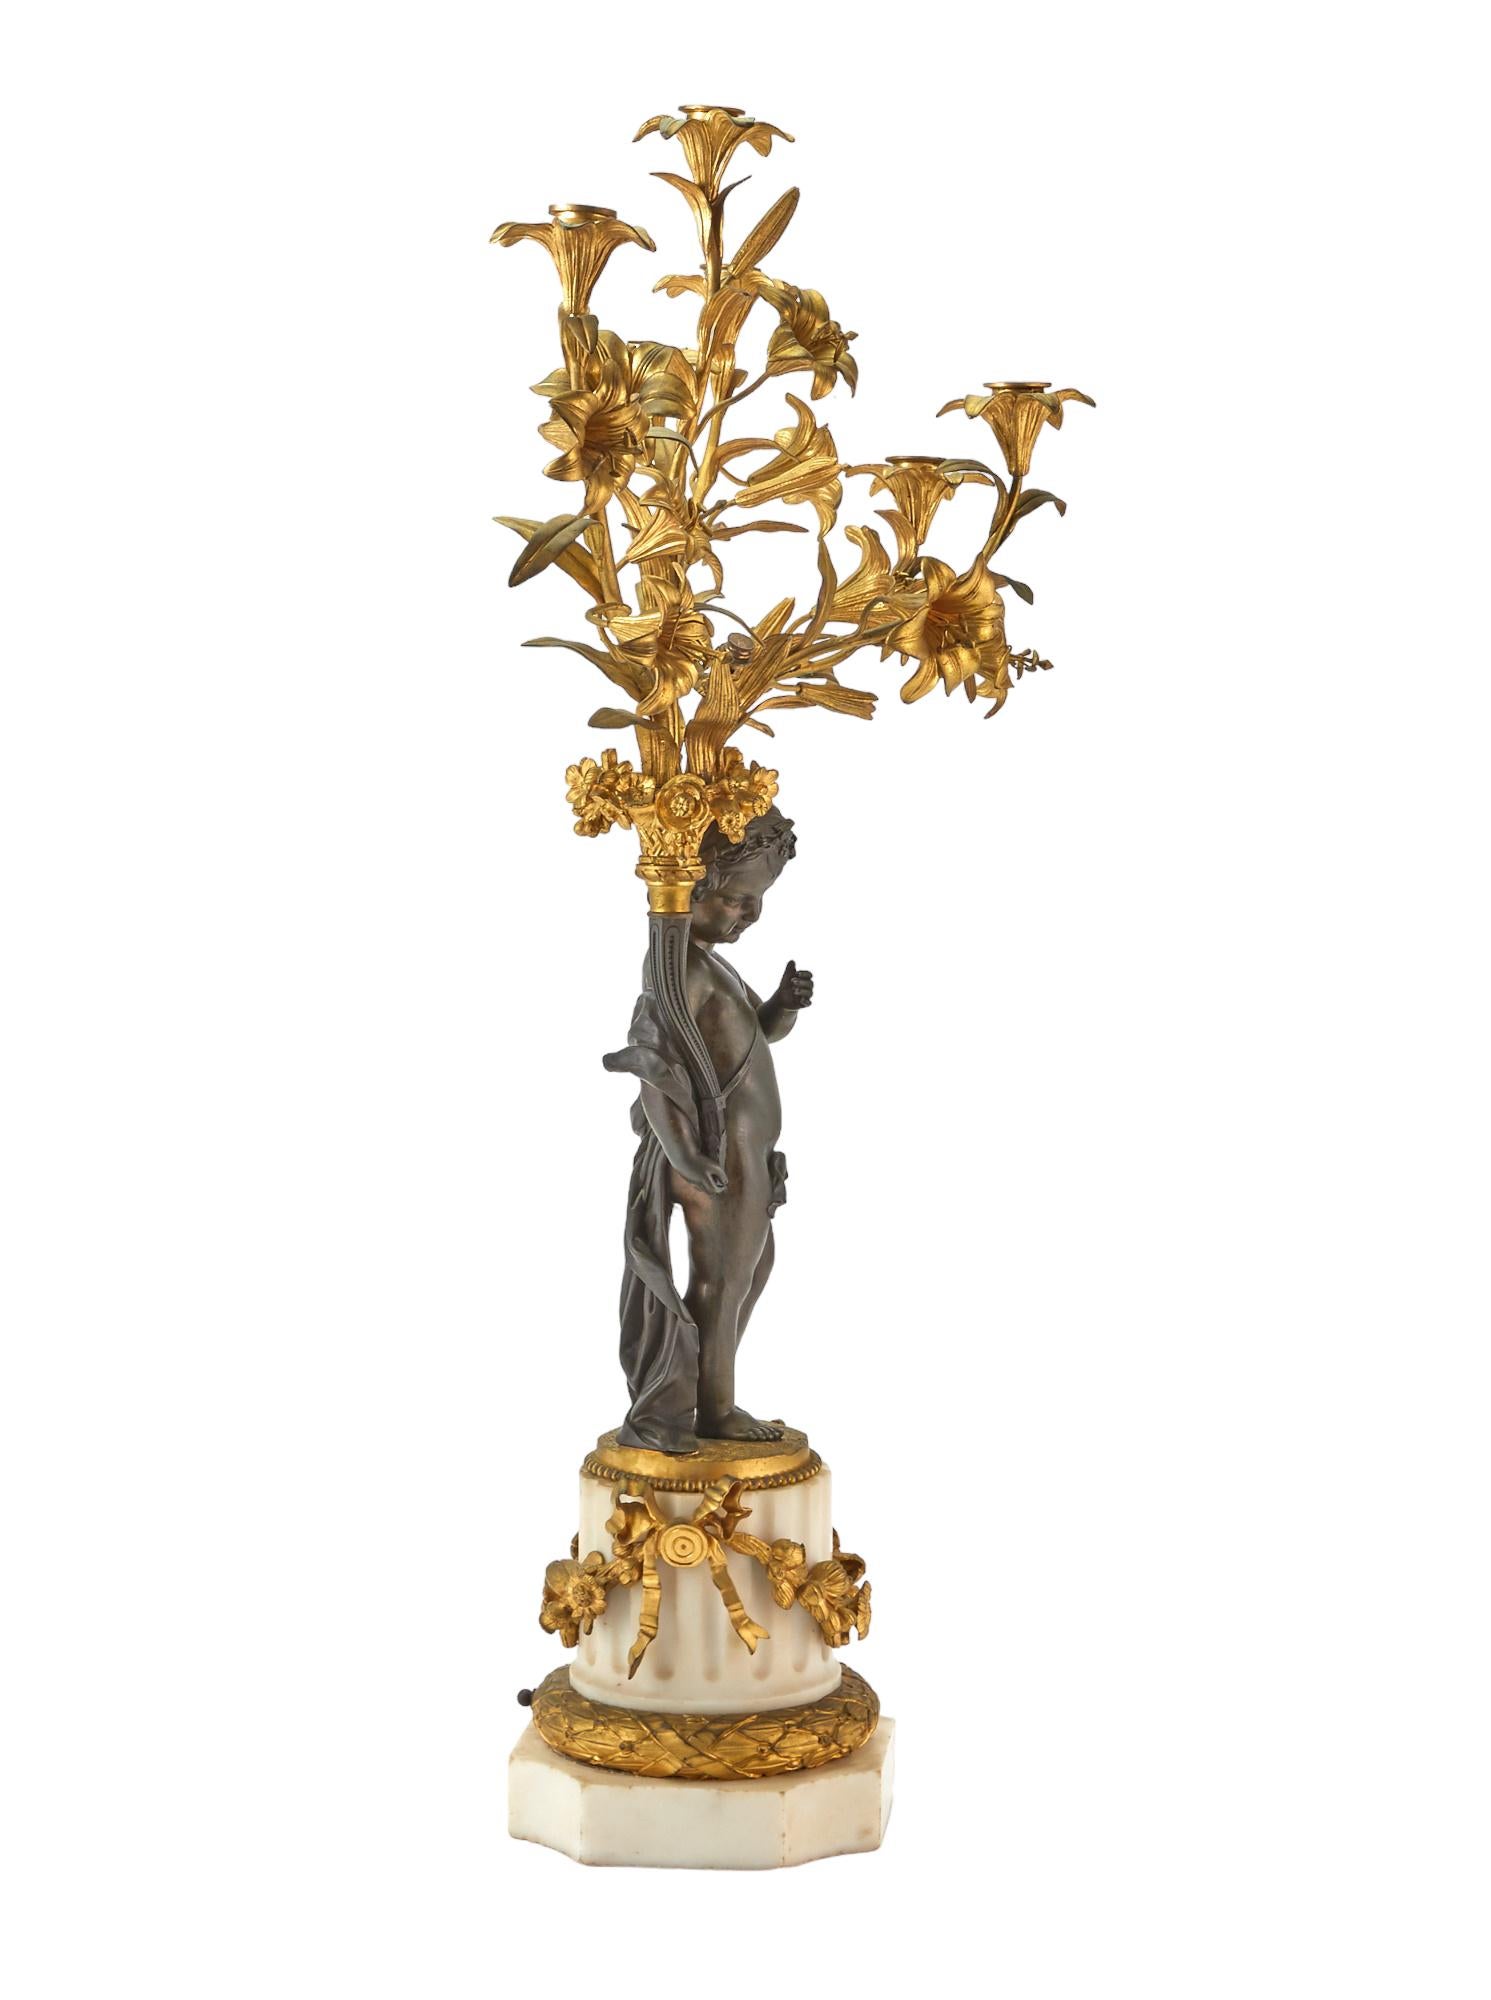 Pair of large  (19th century) five light candelabra in the French Louis XVI style with standing patinated bronze cherubs set upon carved white marble pedestals adorned with gilt bronze garland.  Designed for electricity but apparently sockets and